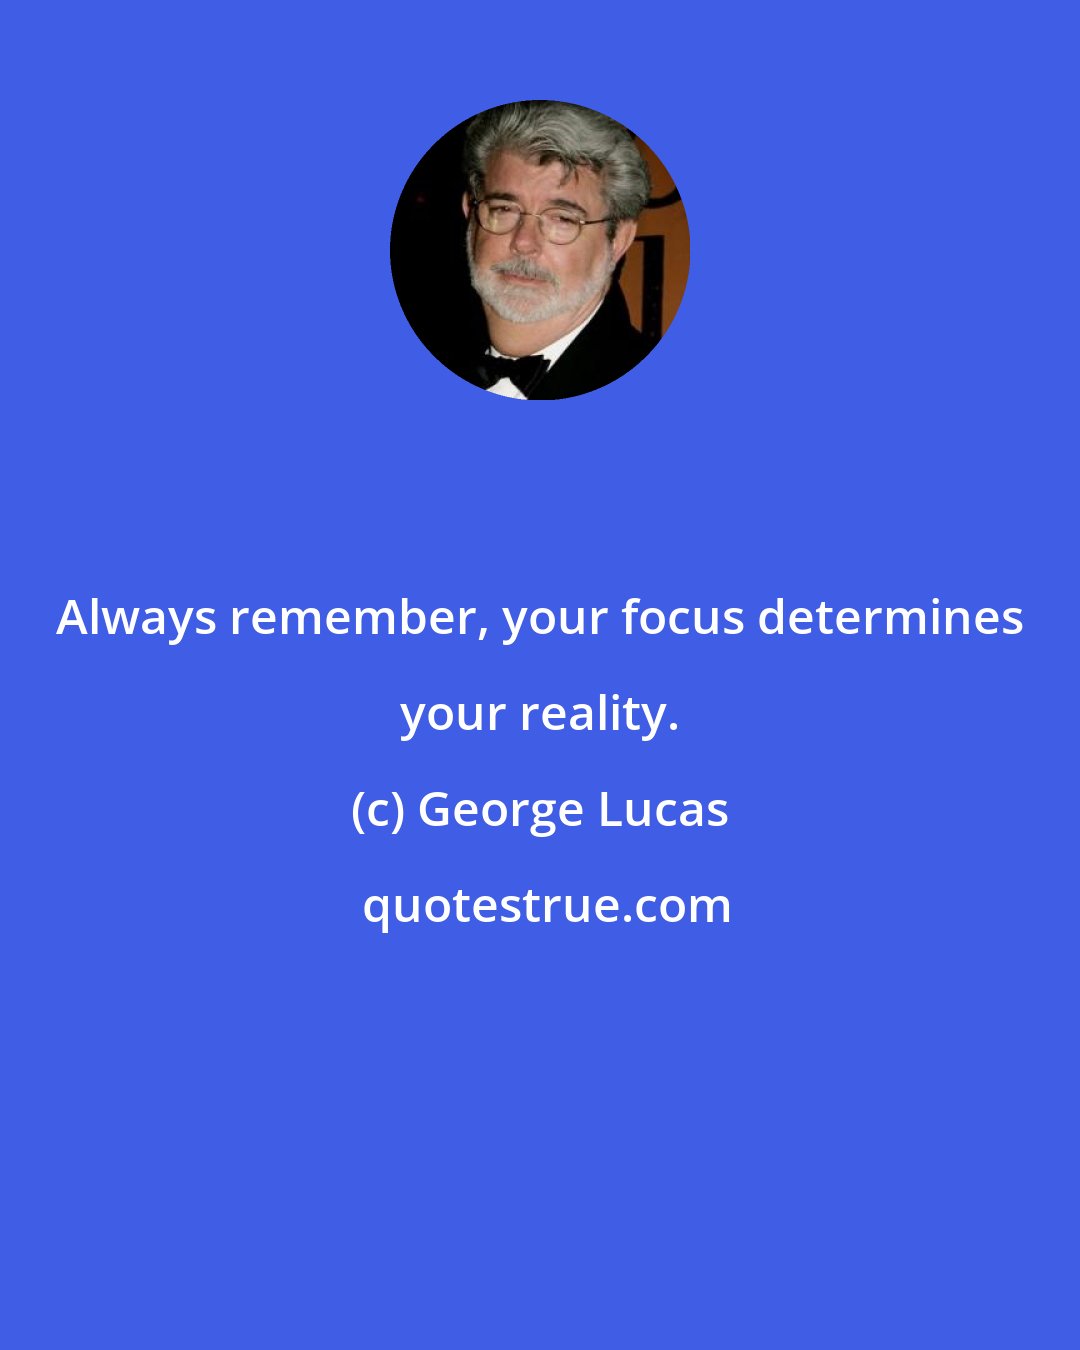 George Lucas: Always remember, your focus determines your reality.